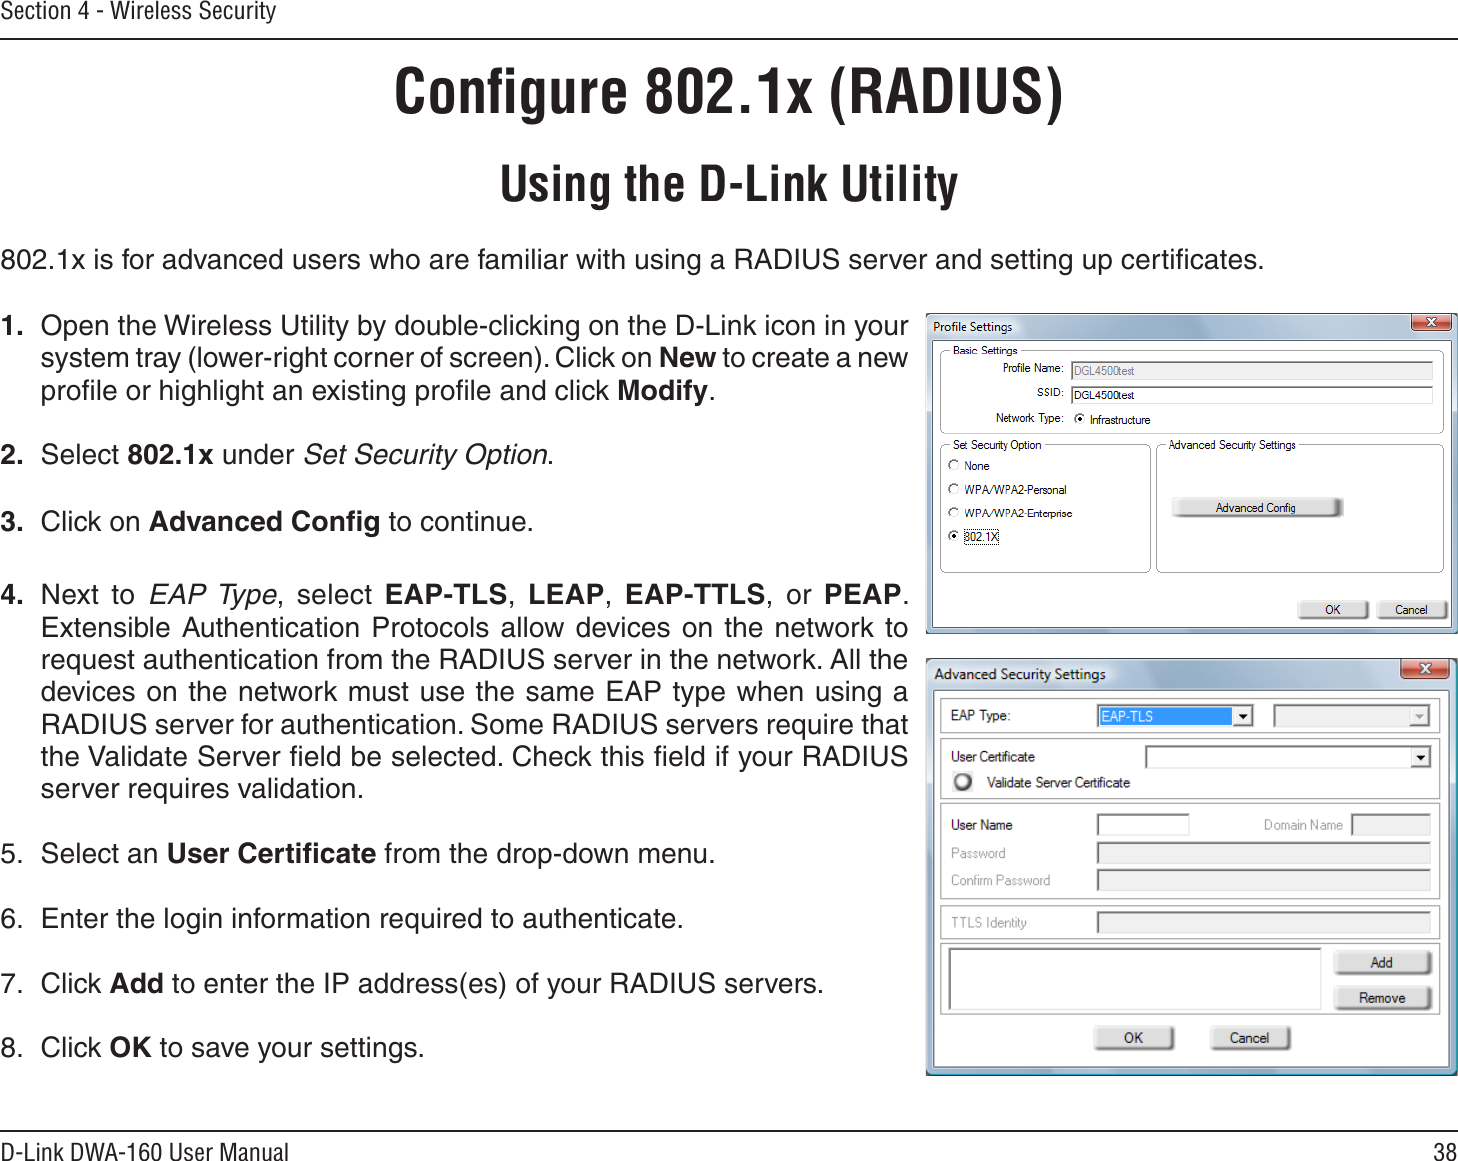 38D-Link DWA-160 User ManualSection 4 - Wireless SecurityConﬁgure 802.1x (RADIUS)Using the D-Link Utility802.1x is for advanced users who are familiar with using a RADIUS server and setting up certiﬁcates.1. Open the Wireless Utility by double-clicking on the D-Link icon in your system tray (lower-right corner of screen). Click on New to create a new proﬁle or highlight an existing proﬁle and click Modify. 2. Select 802.1x under Set Security Option.3. Click on Advanced Conﬁg to continue.4. Next to EAP Type, select EAP-TLS,  LEAP,  EAP-TTLS, or PEAP. Extensible Authentication Protocols allow devices on the network to request authentication from the RADIUS server in the network. All the devices on the network must use the same EAP type when using a RADIUS server for authentication. Some RADIUS servers require that the Validate Server ﬁeld be selected. Check this ﬁeld if your RADIUS server requires validation.5. Select an User Certiﬁcate from the drop-down menu.6. Enter the login information required to authenticate.7. Click Add to enter the IP address(es) of your RADIUS servers.8. Click OK to save your settings.